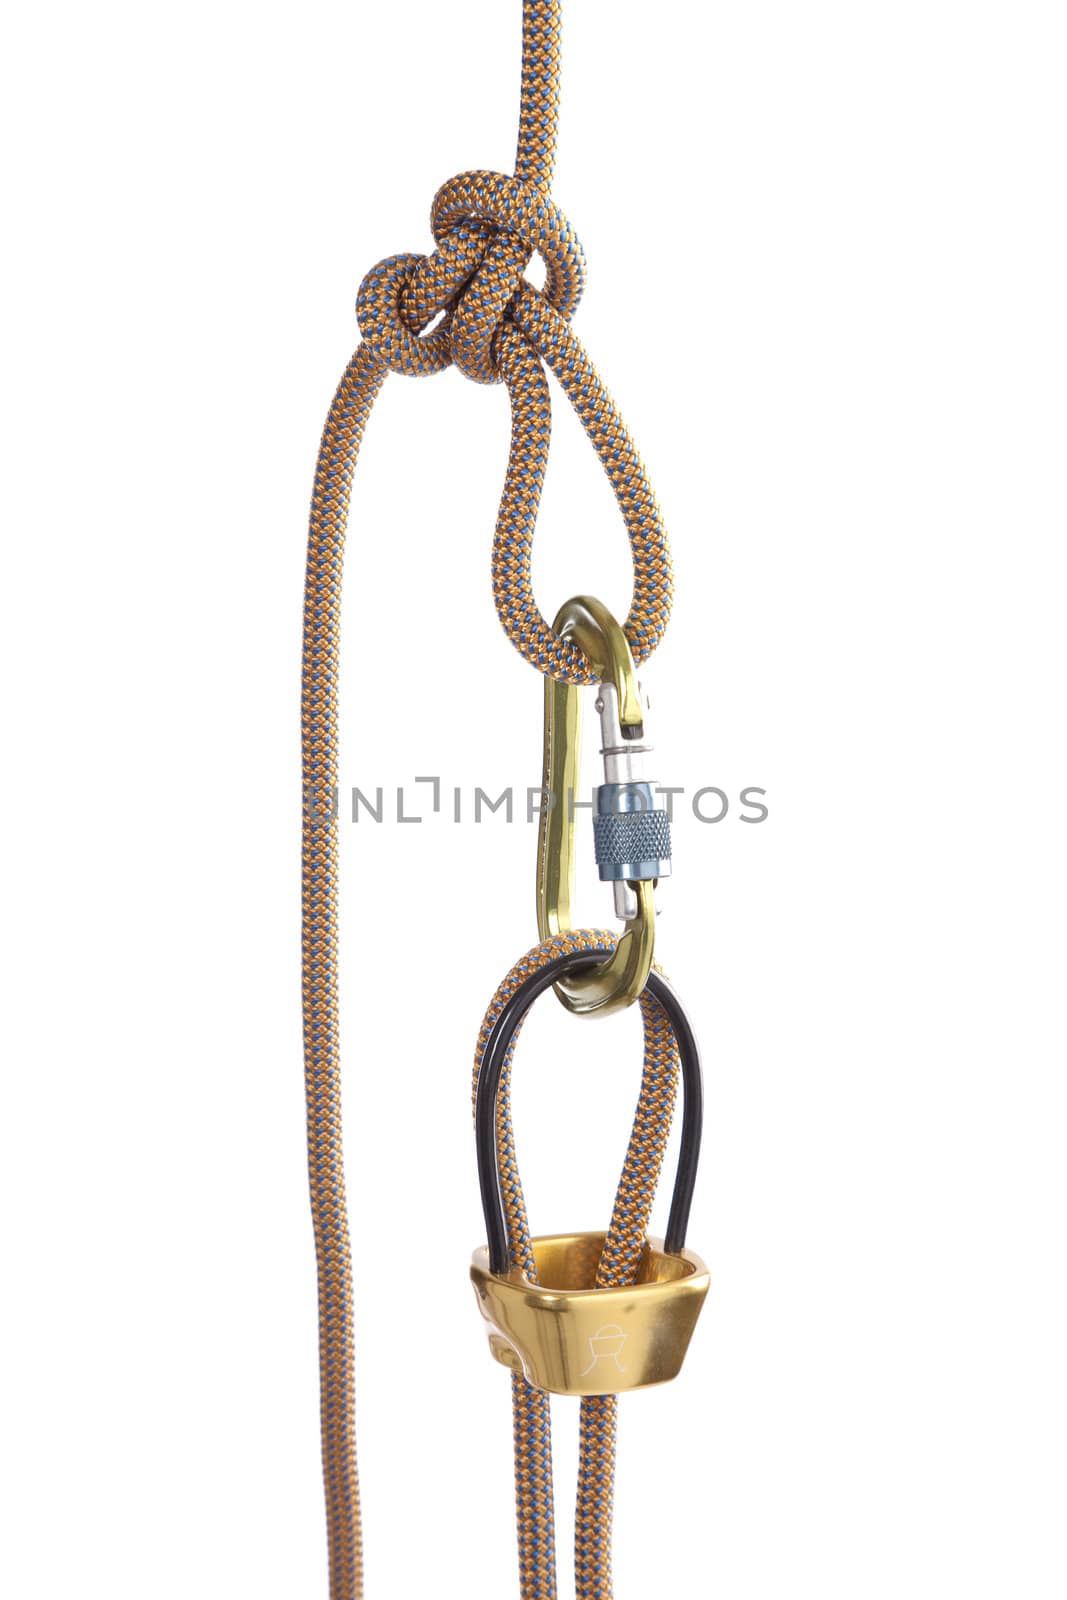 Isolater climbing rope and carabiner over white background